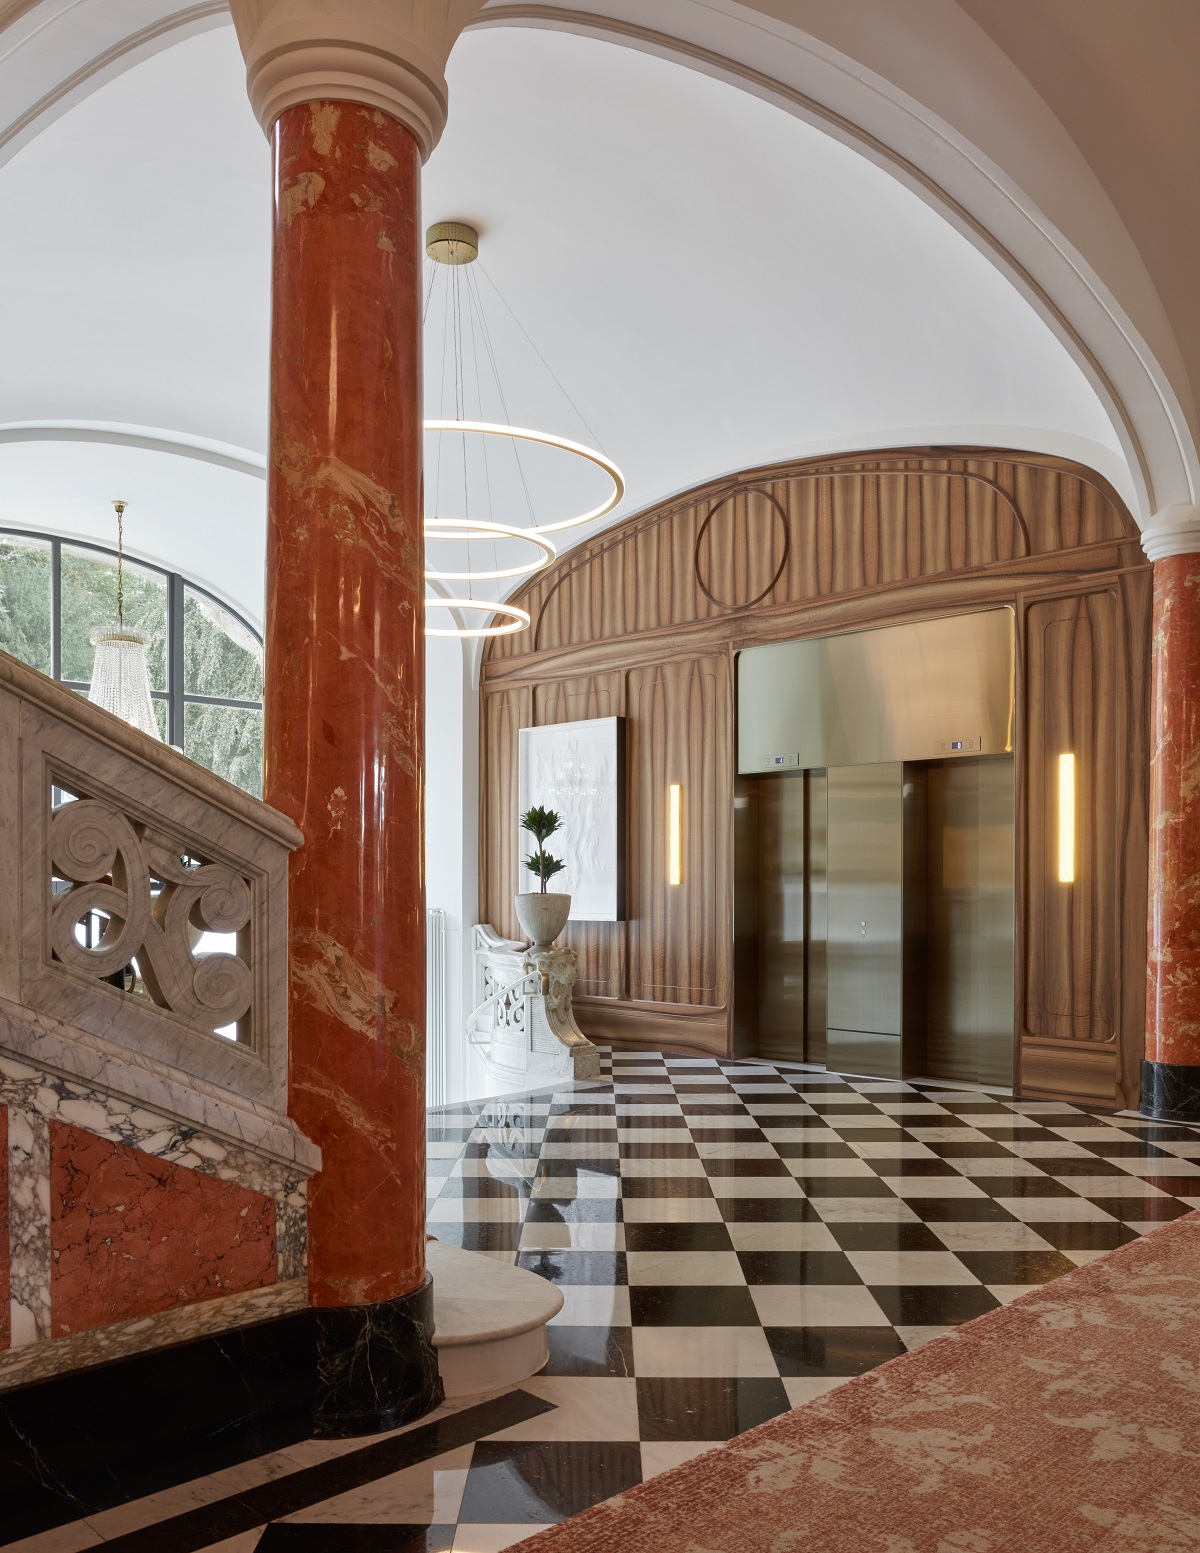 entrance and lobby at mandarin oriental Palace luzern with design by Jestico + Whiles incorporating black and white marble floor and restored terracotta marble pillars